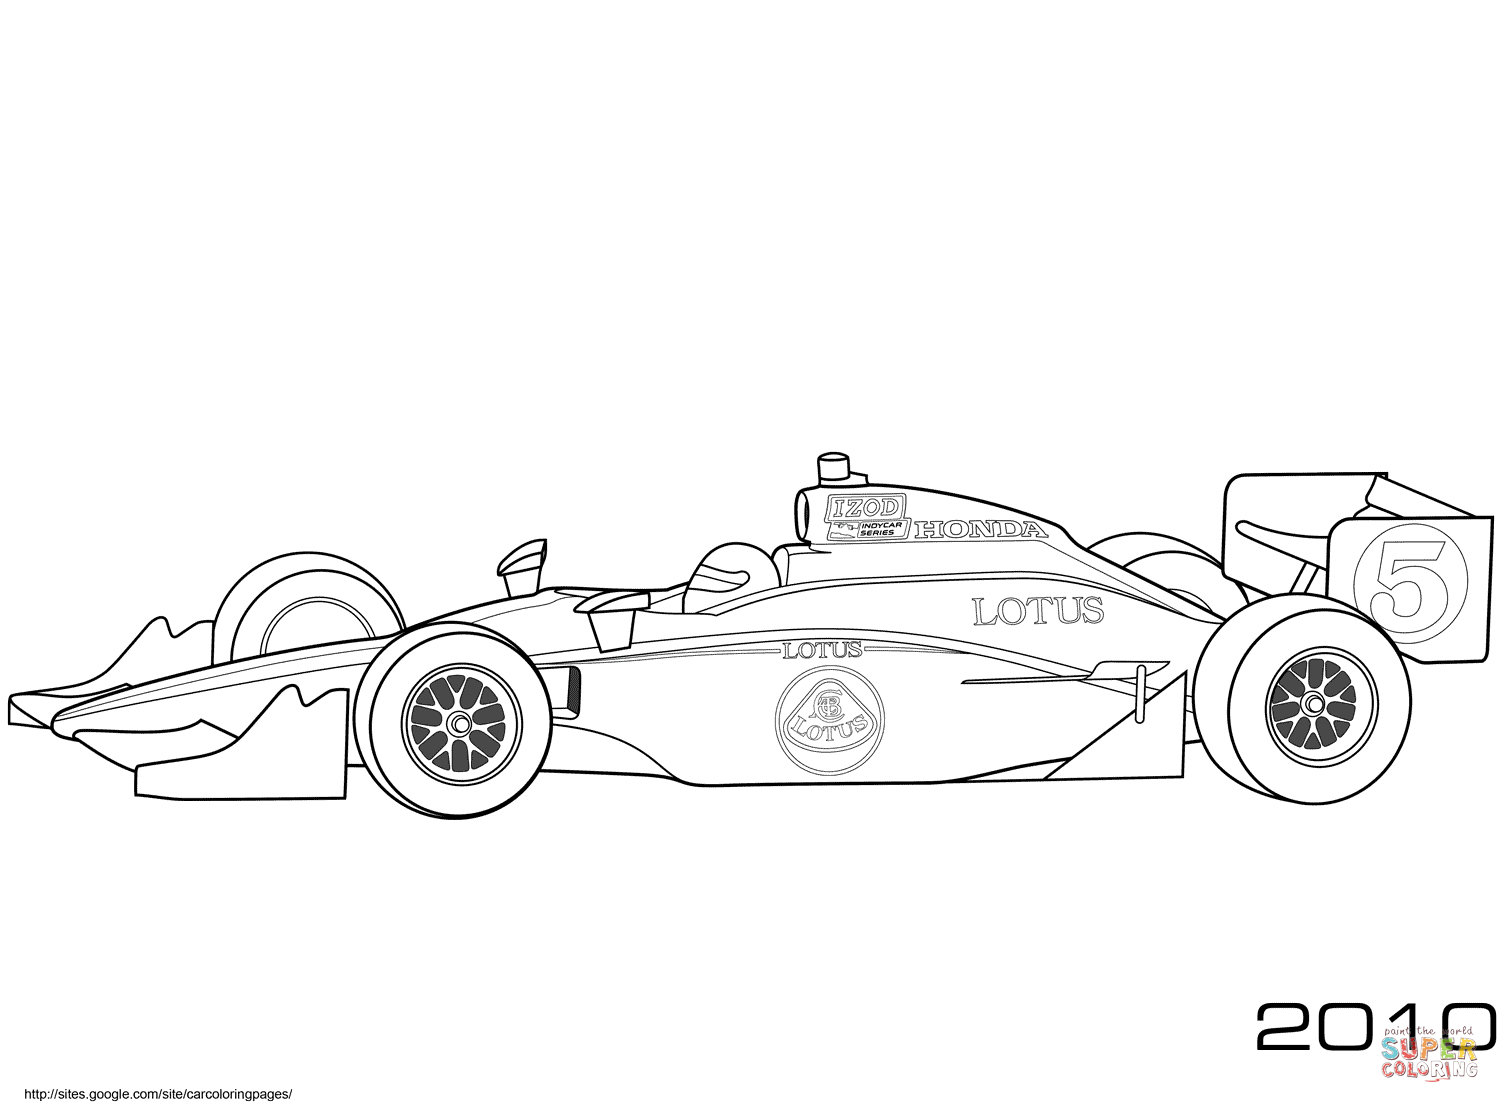 Blank Race Car Coloring Pages With Regard To Blank Race Car Templates